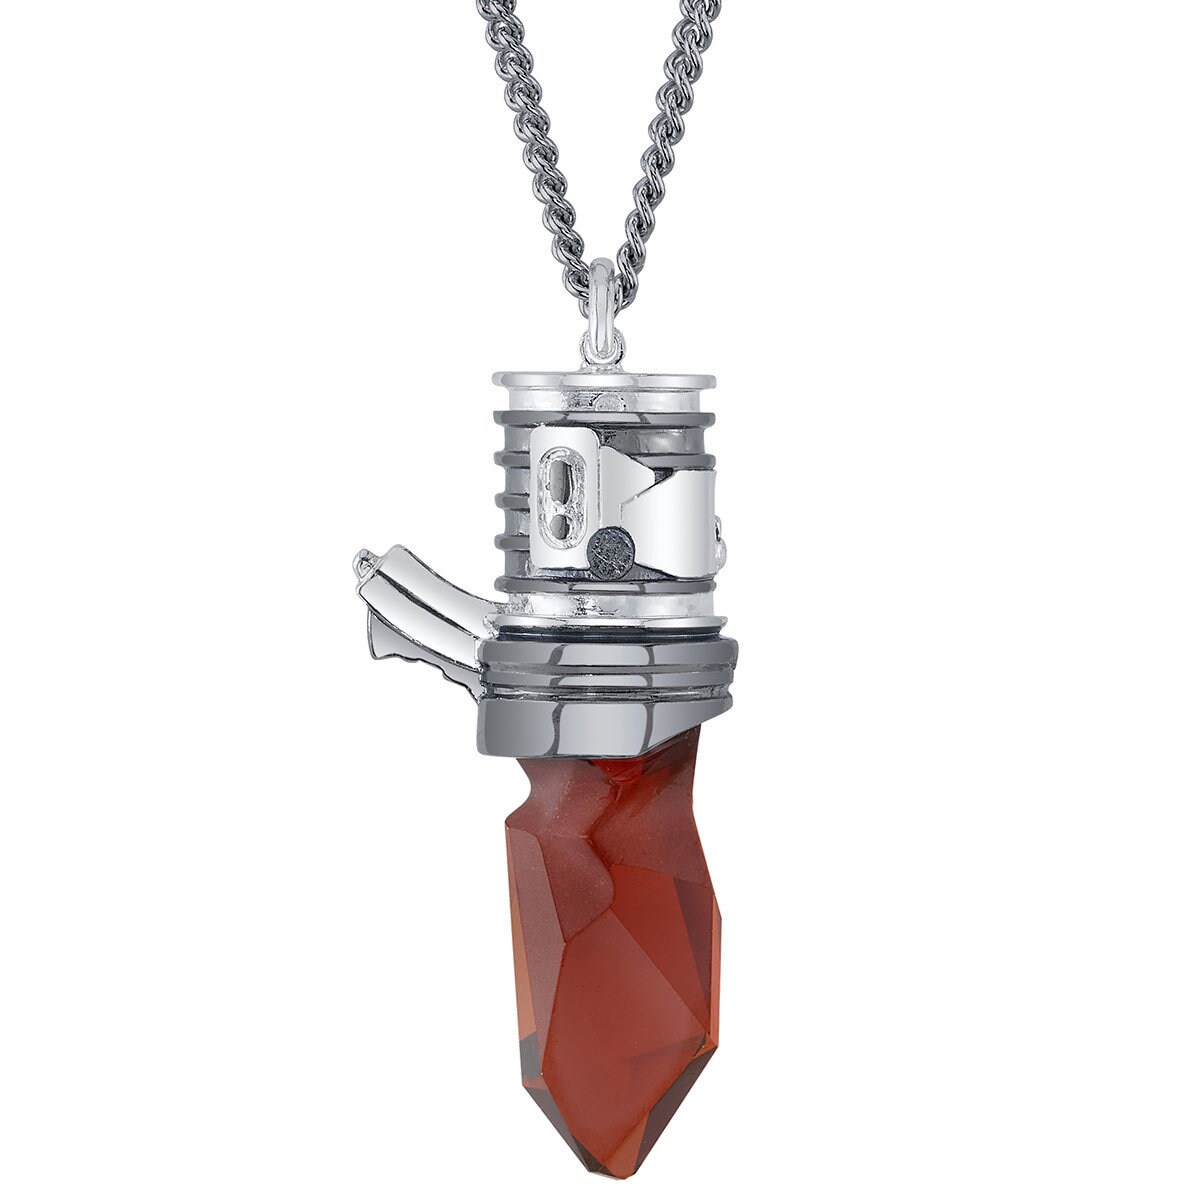 D23 Expo 2022 exclusive necklace featuring Reva's red kyber crystal.